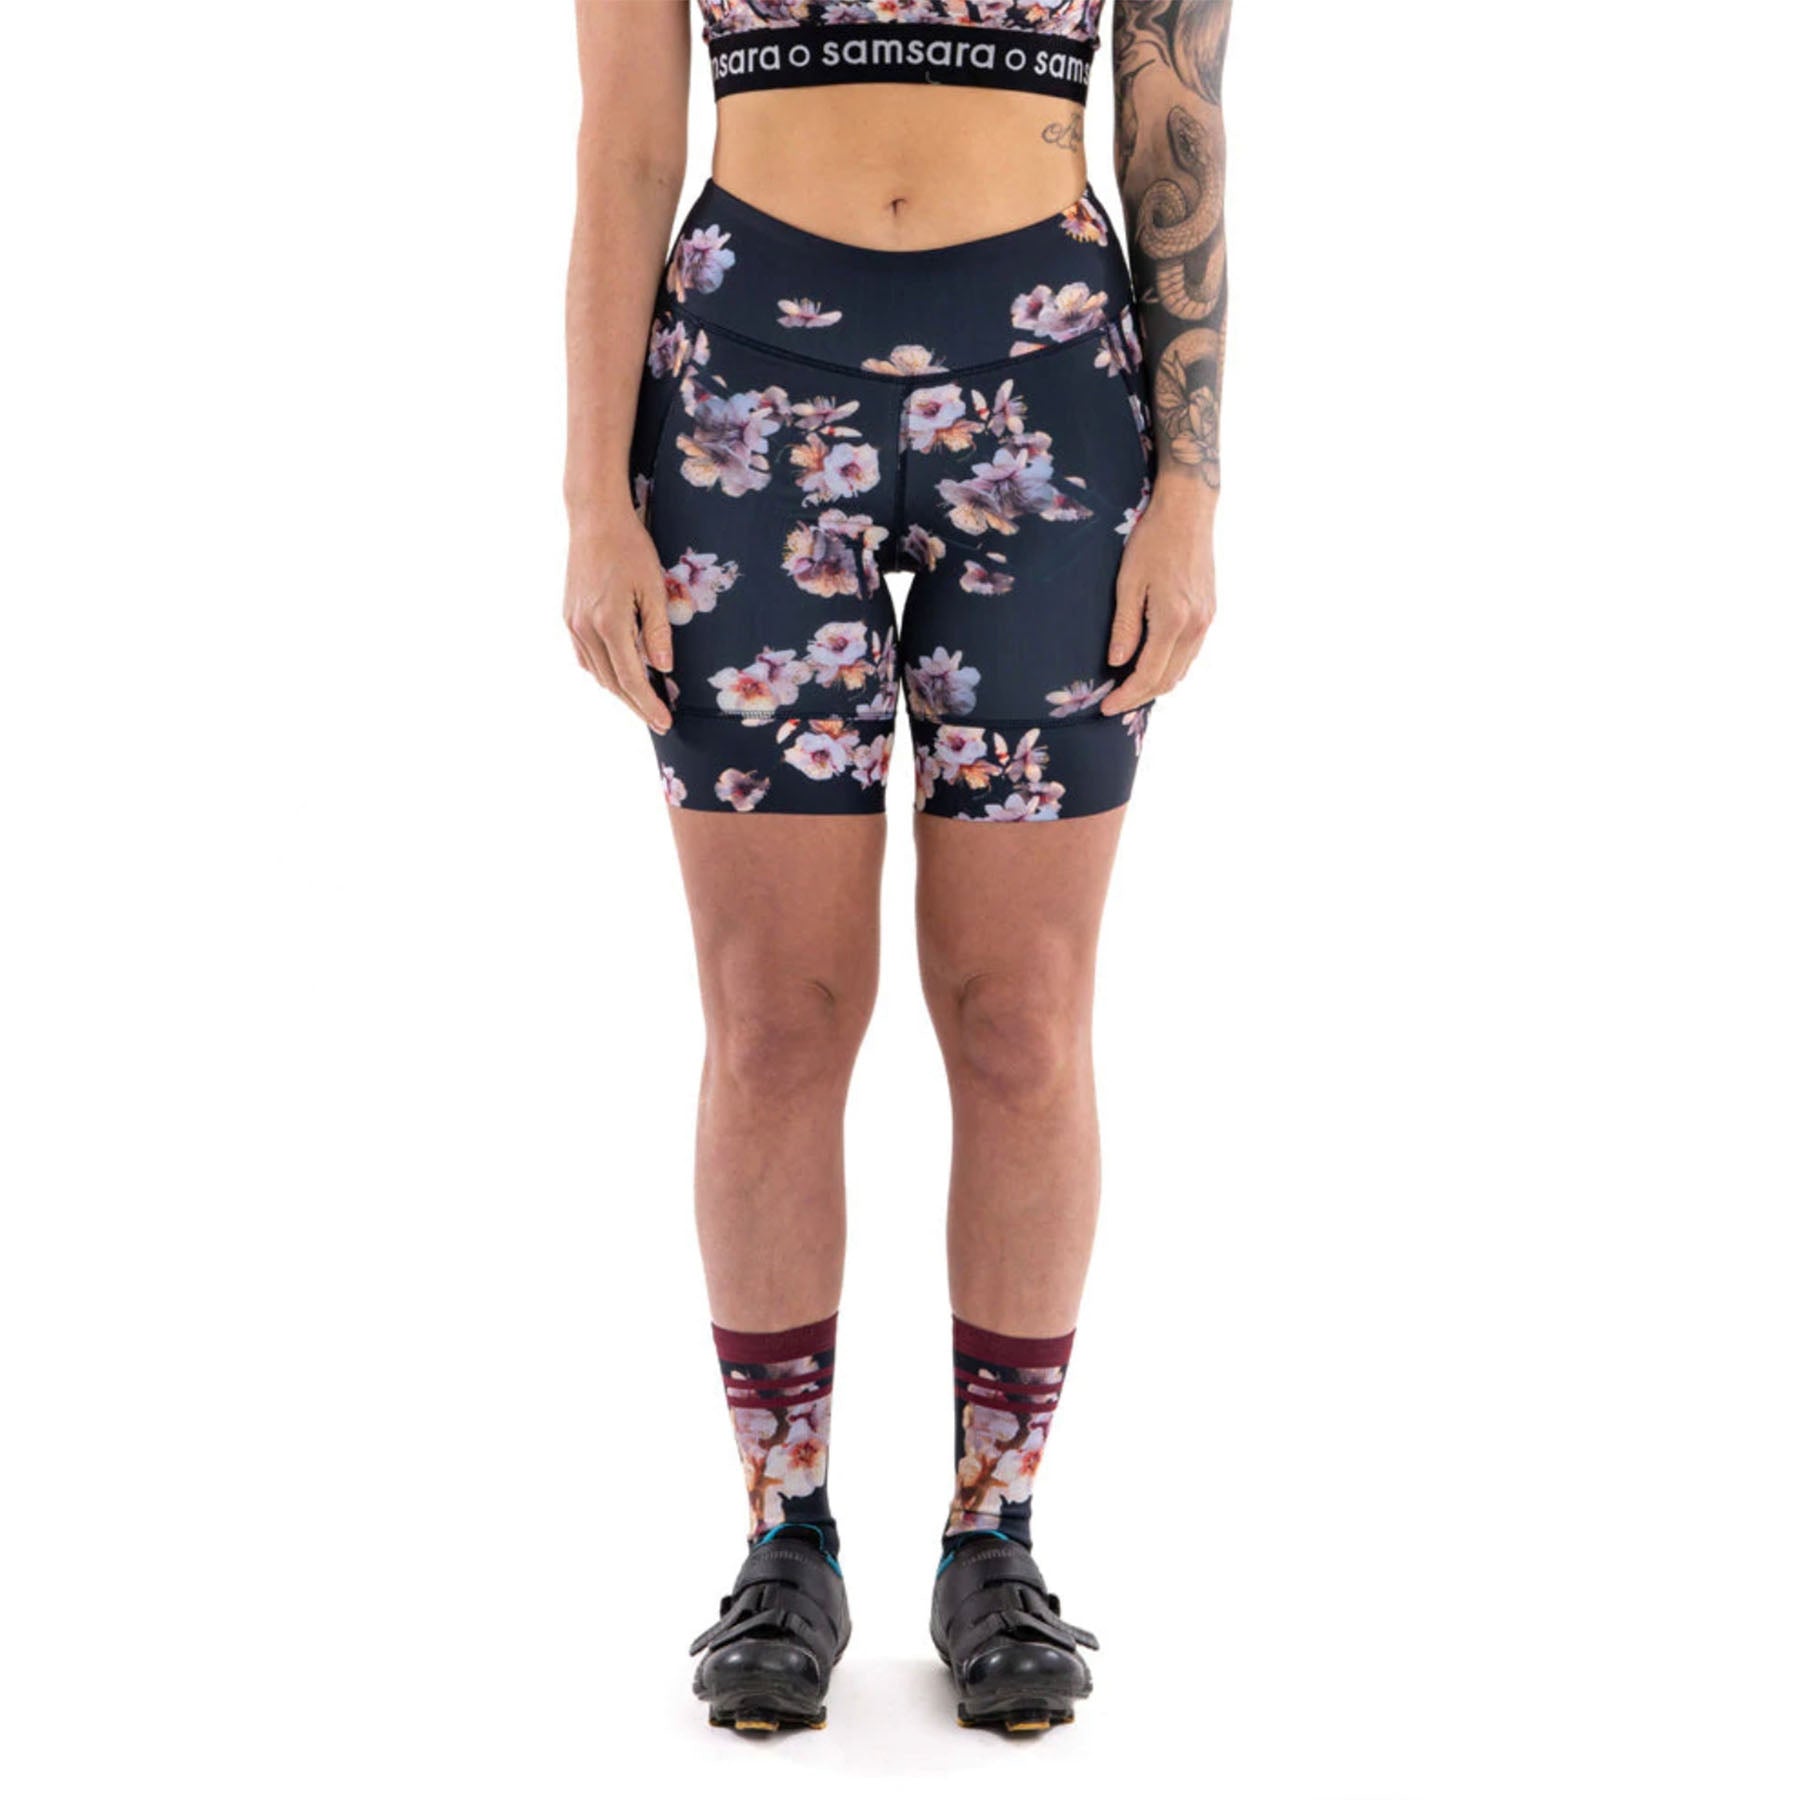 Hero image featuring the front of the Samsara performance 7" cycling shorts in cherry blossom